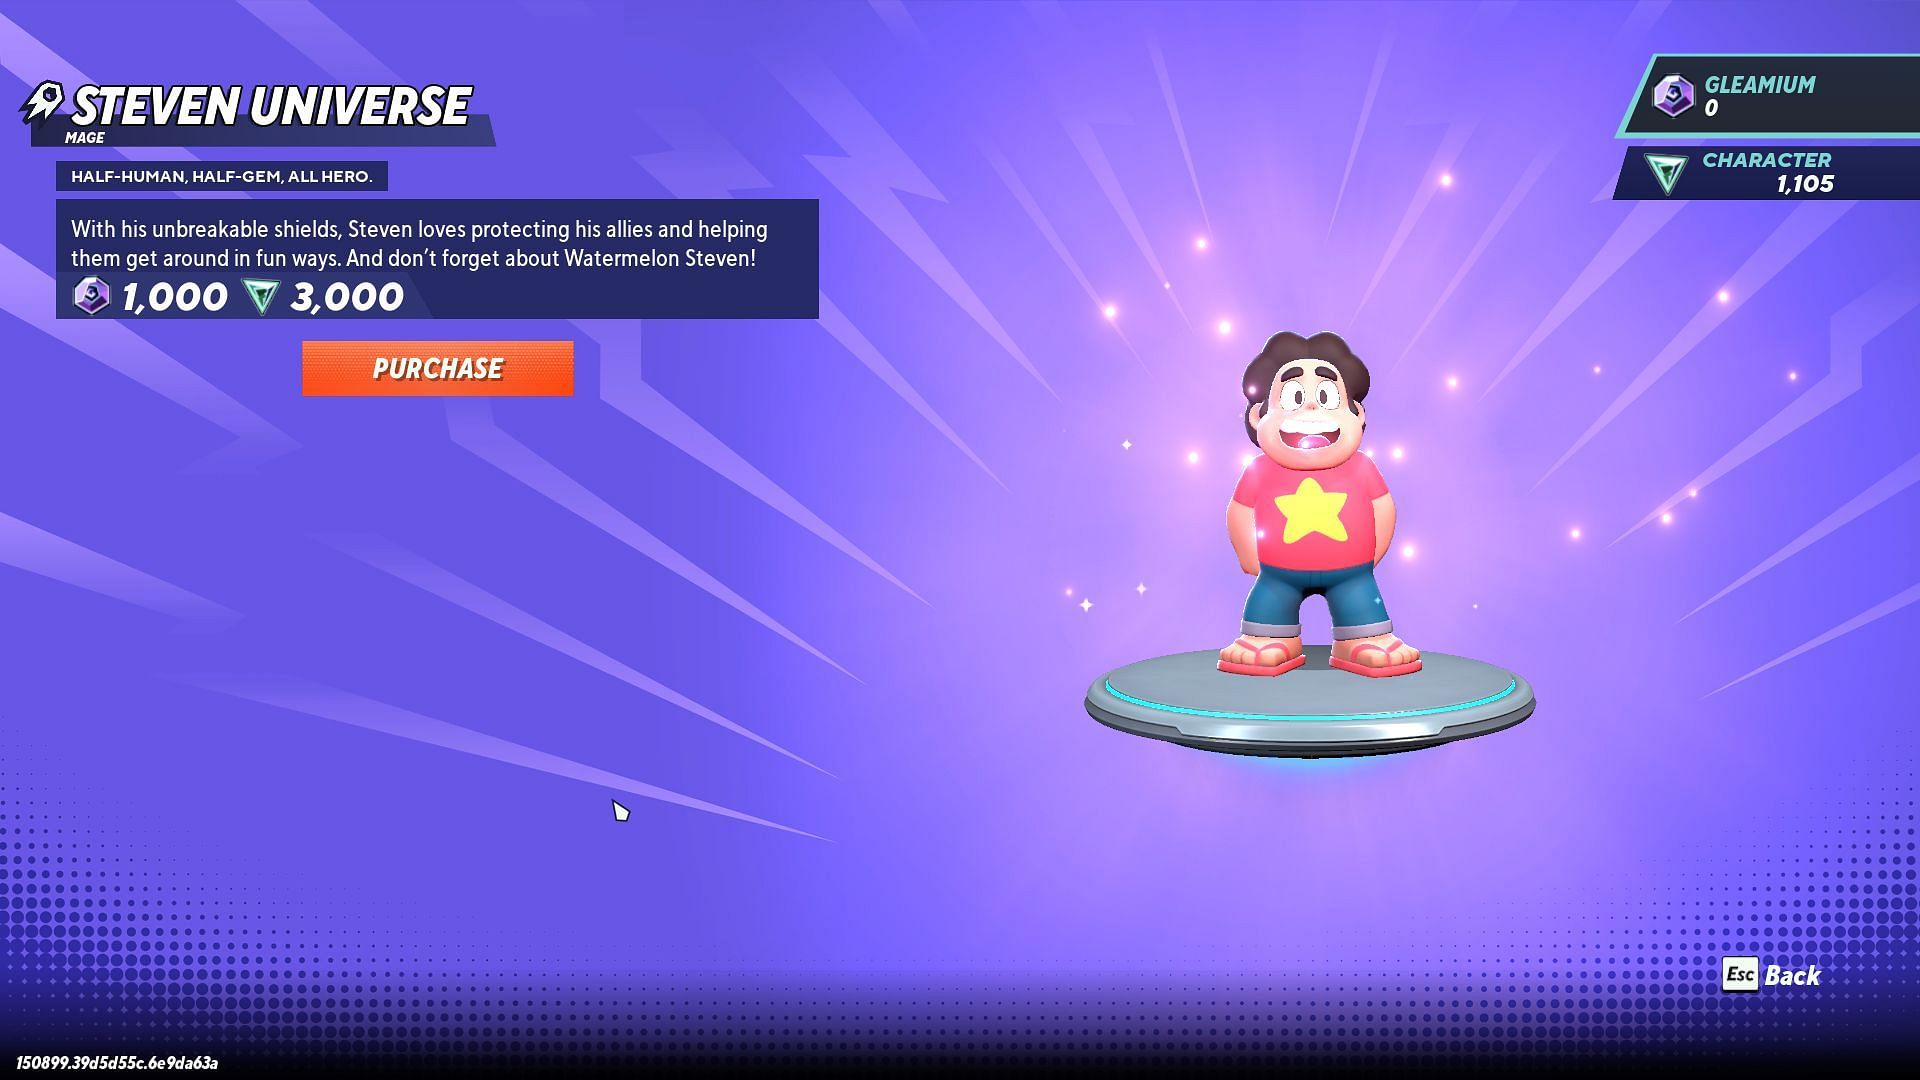 Steven Universe can be purchased using Gleamium or Fighter currency (Image via Warner Bros. Games)